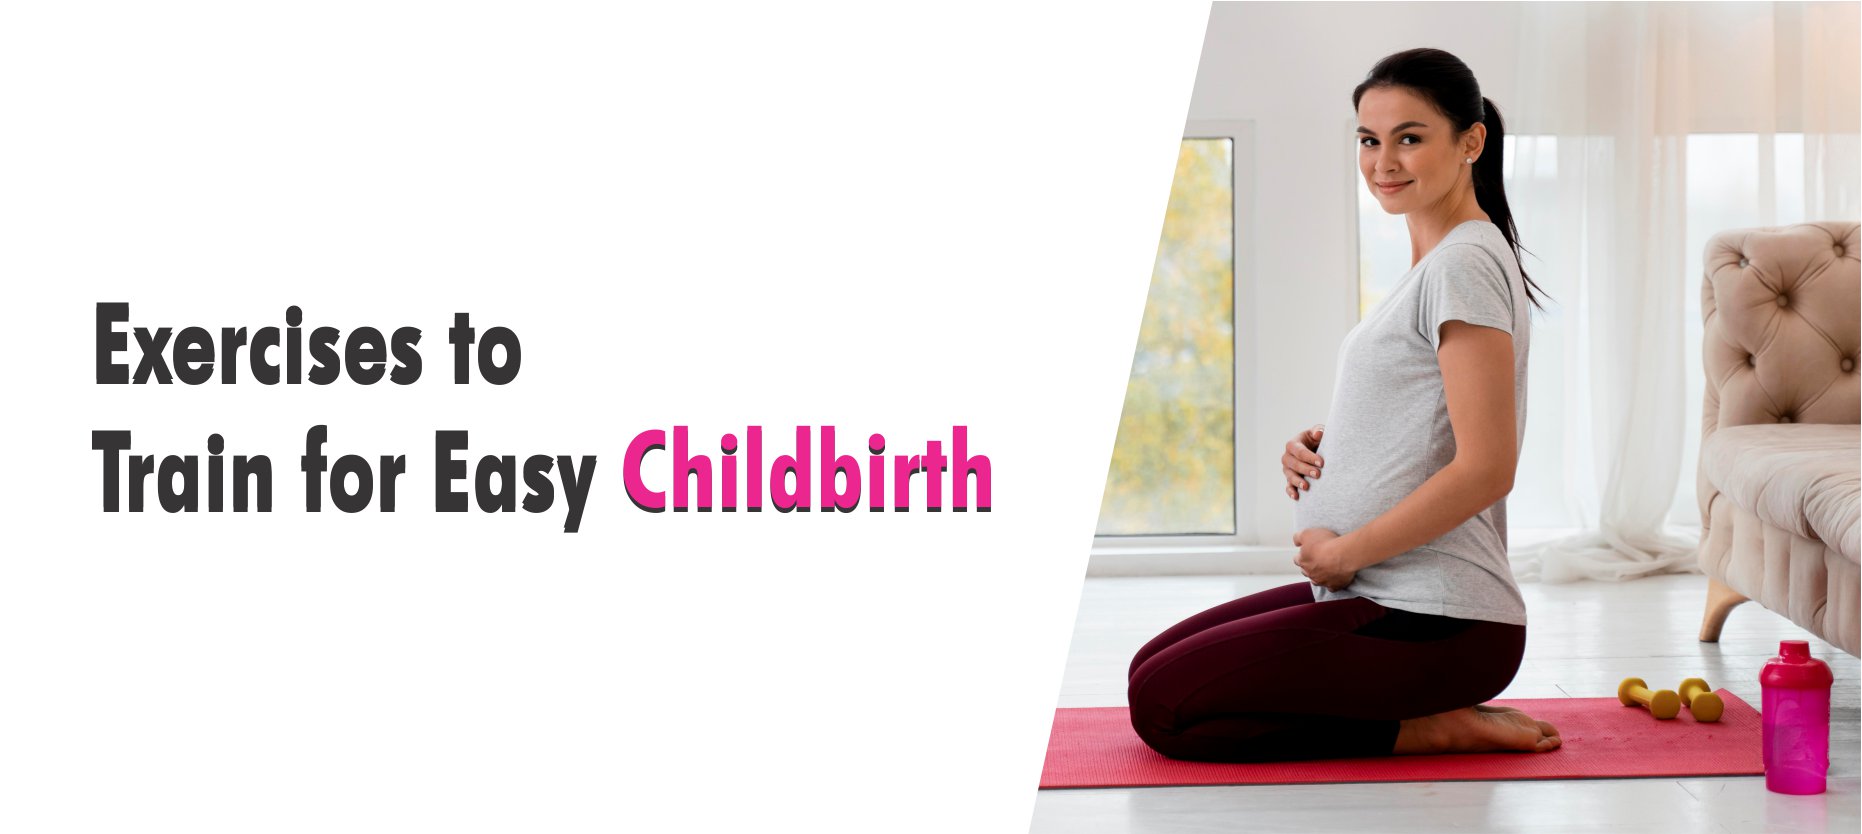 Best Exercises for Easy Childbirth